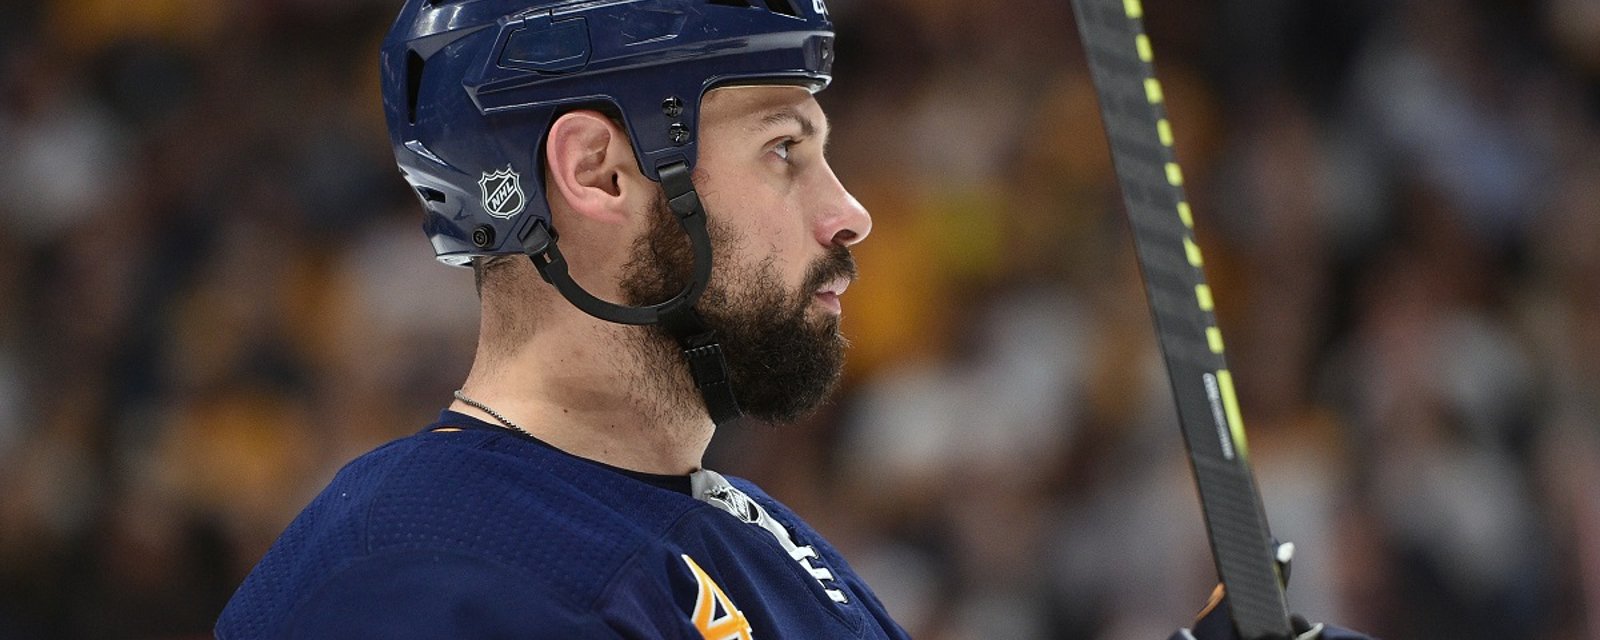 Zach Bogosian's career may have just hit rock bottom.